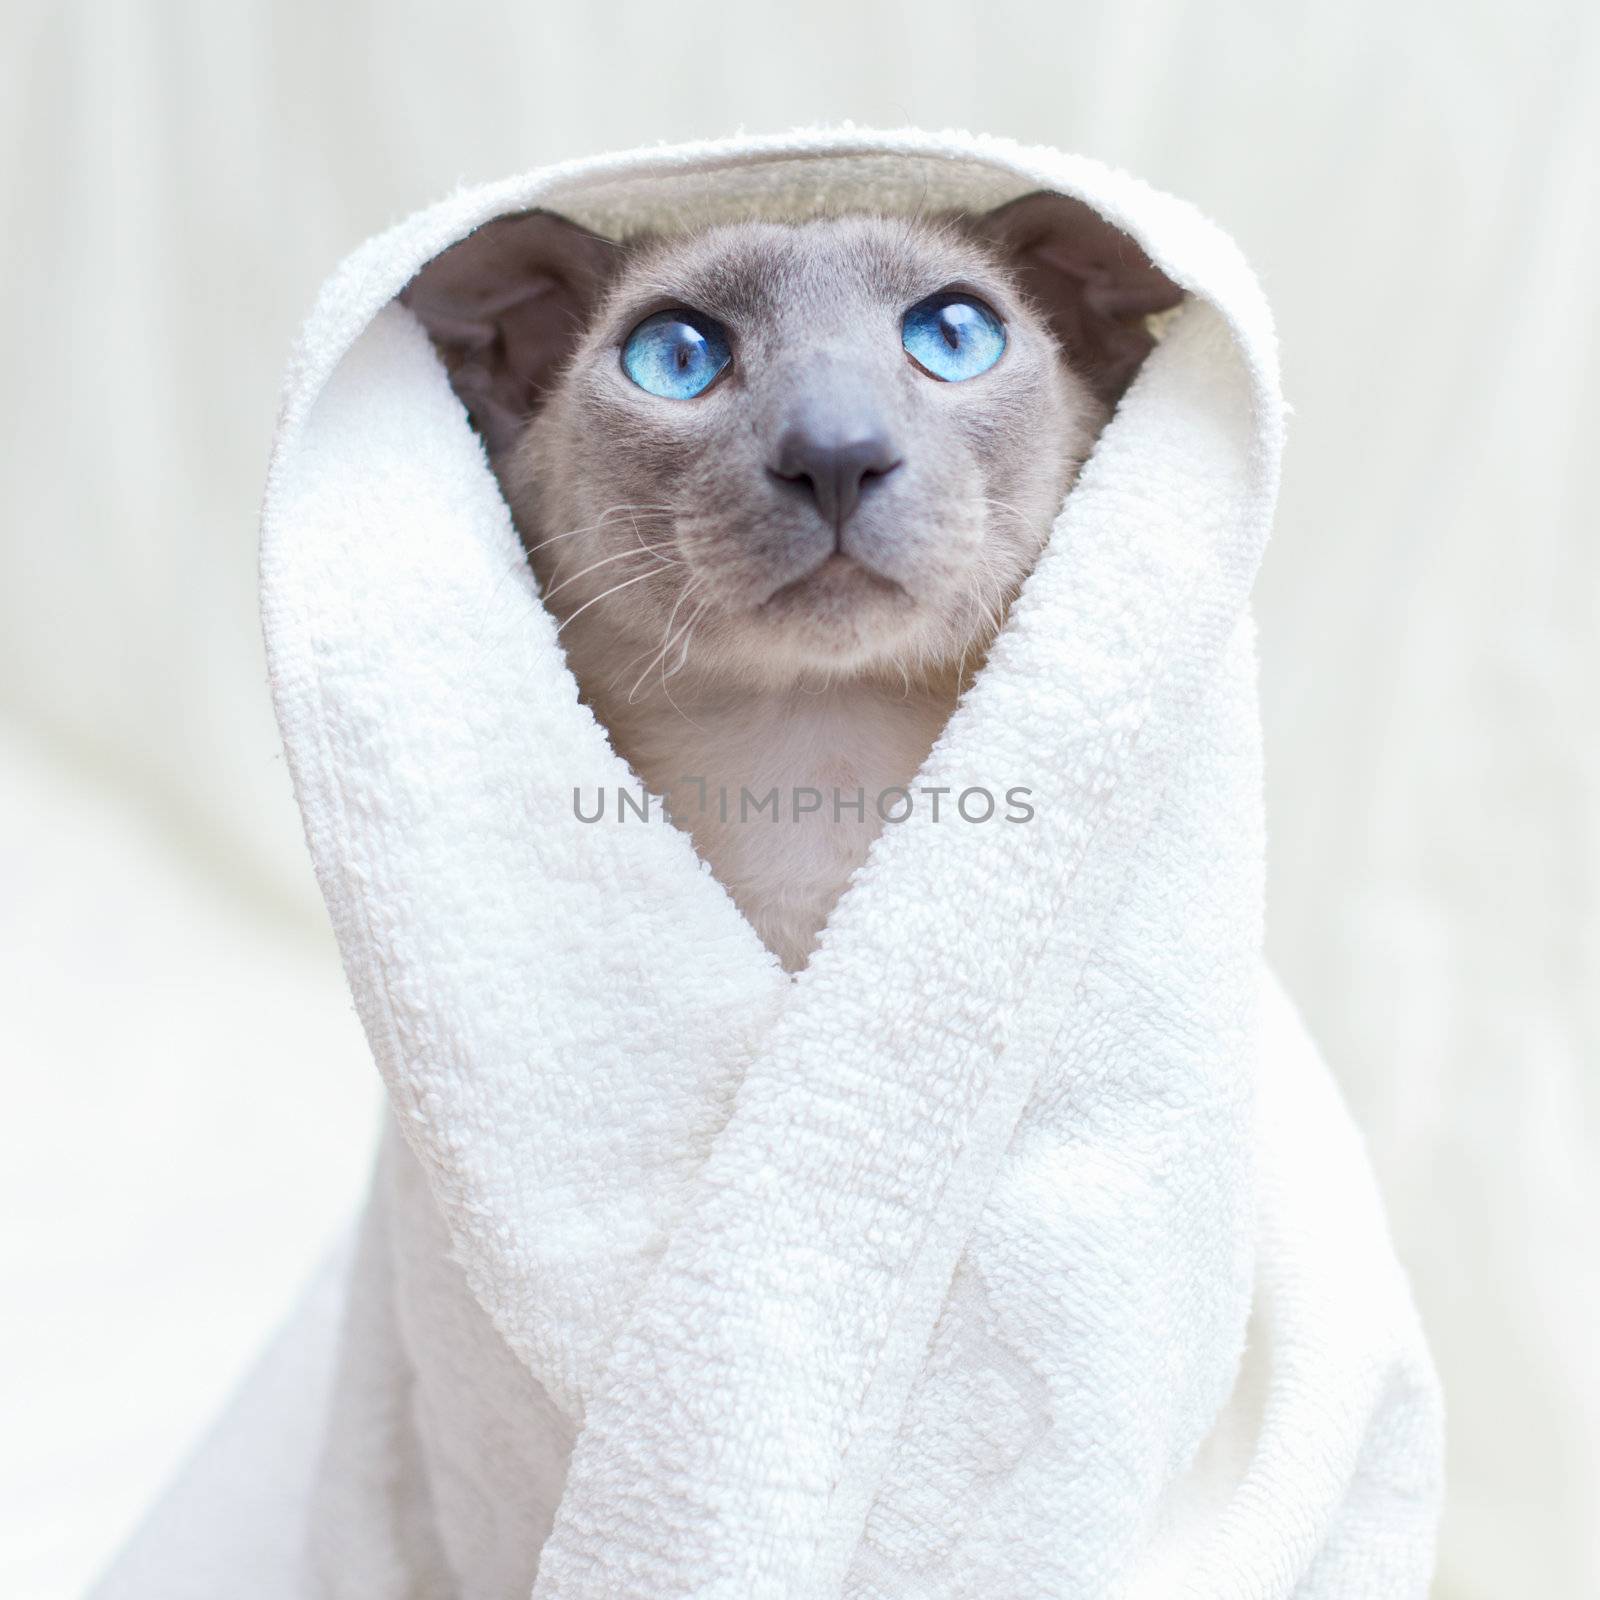 Hairless Cat in Towel by petr_malyshev